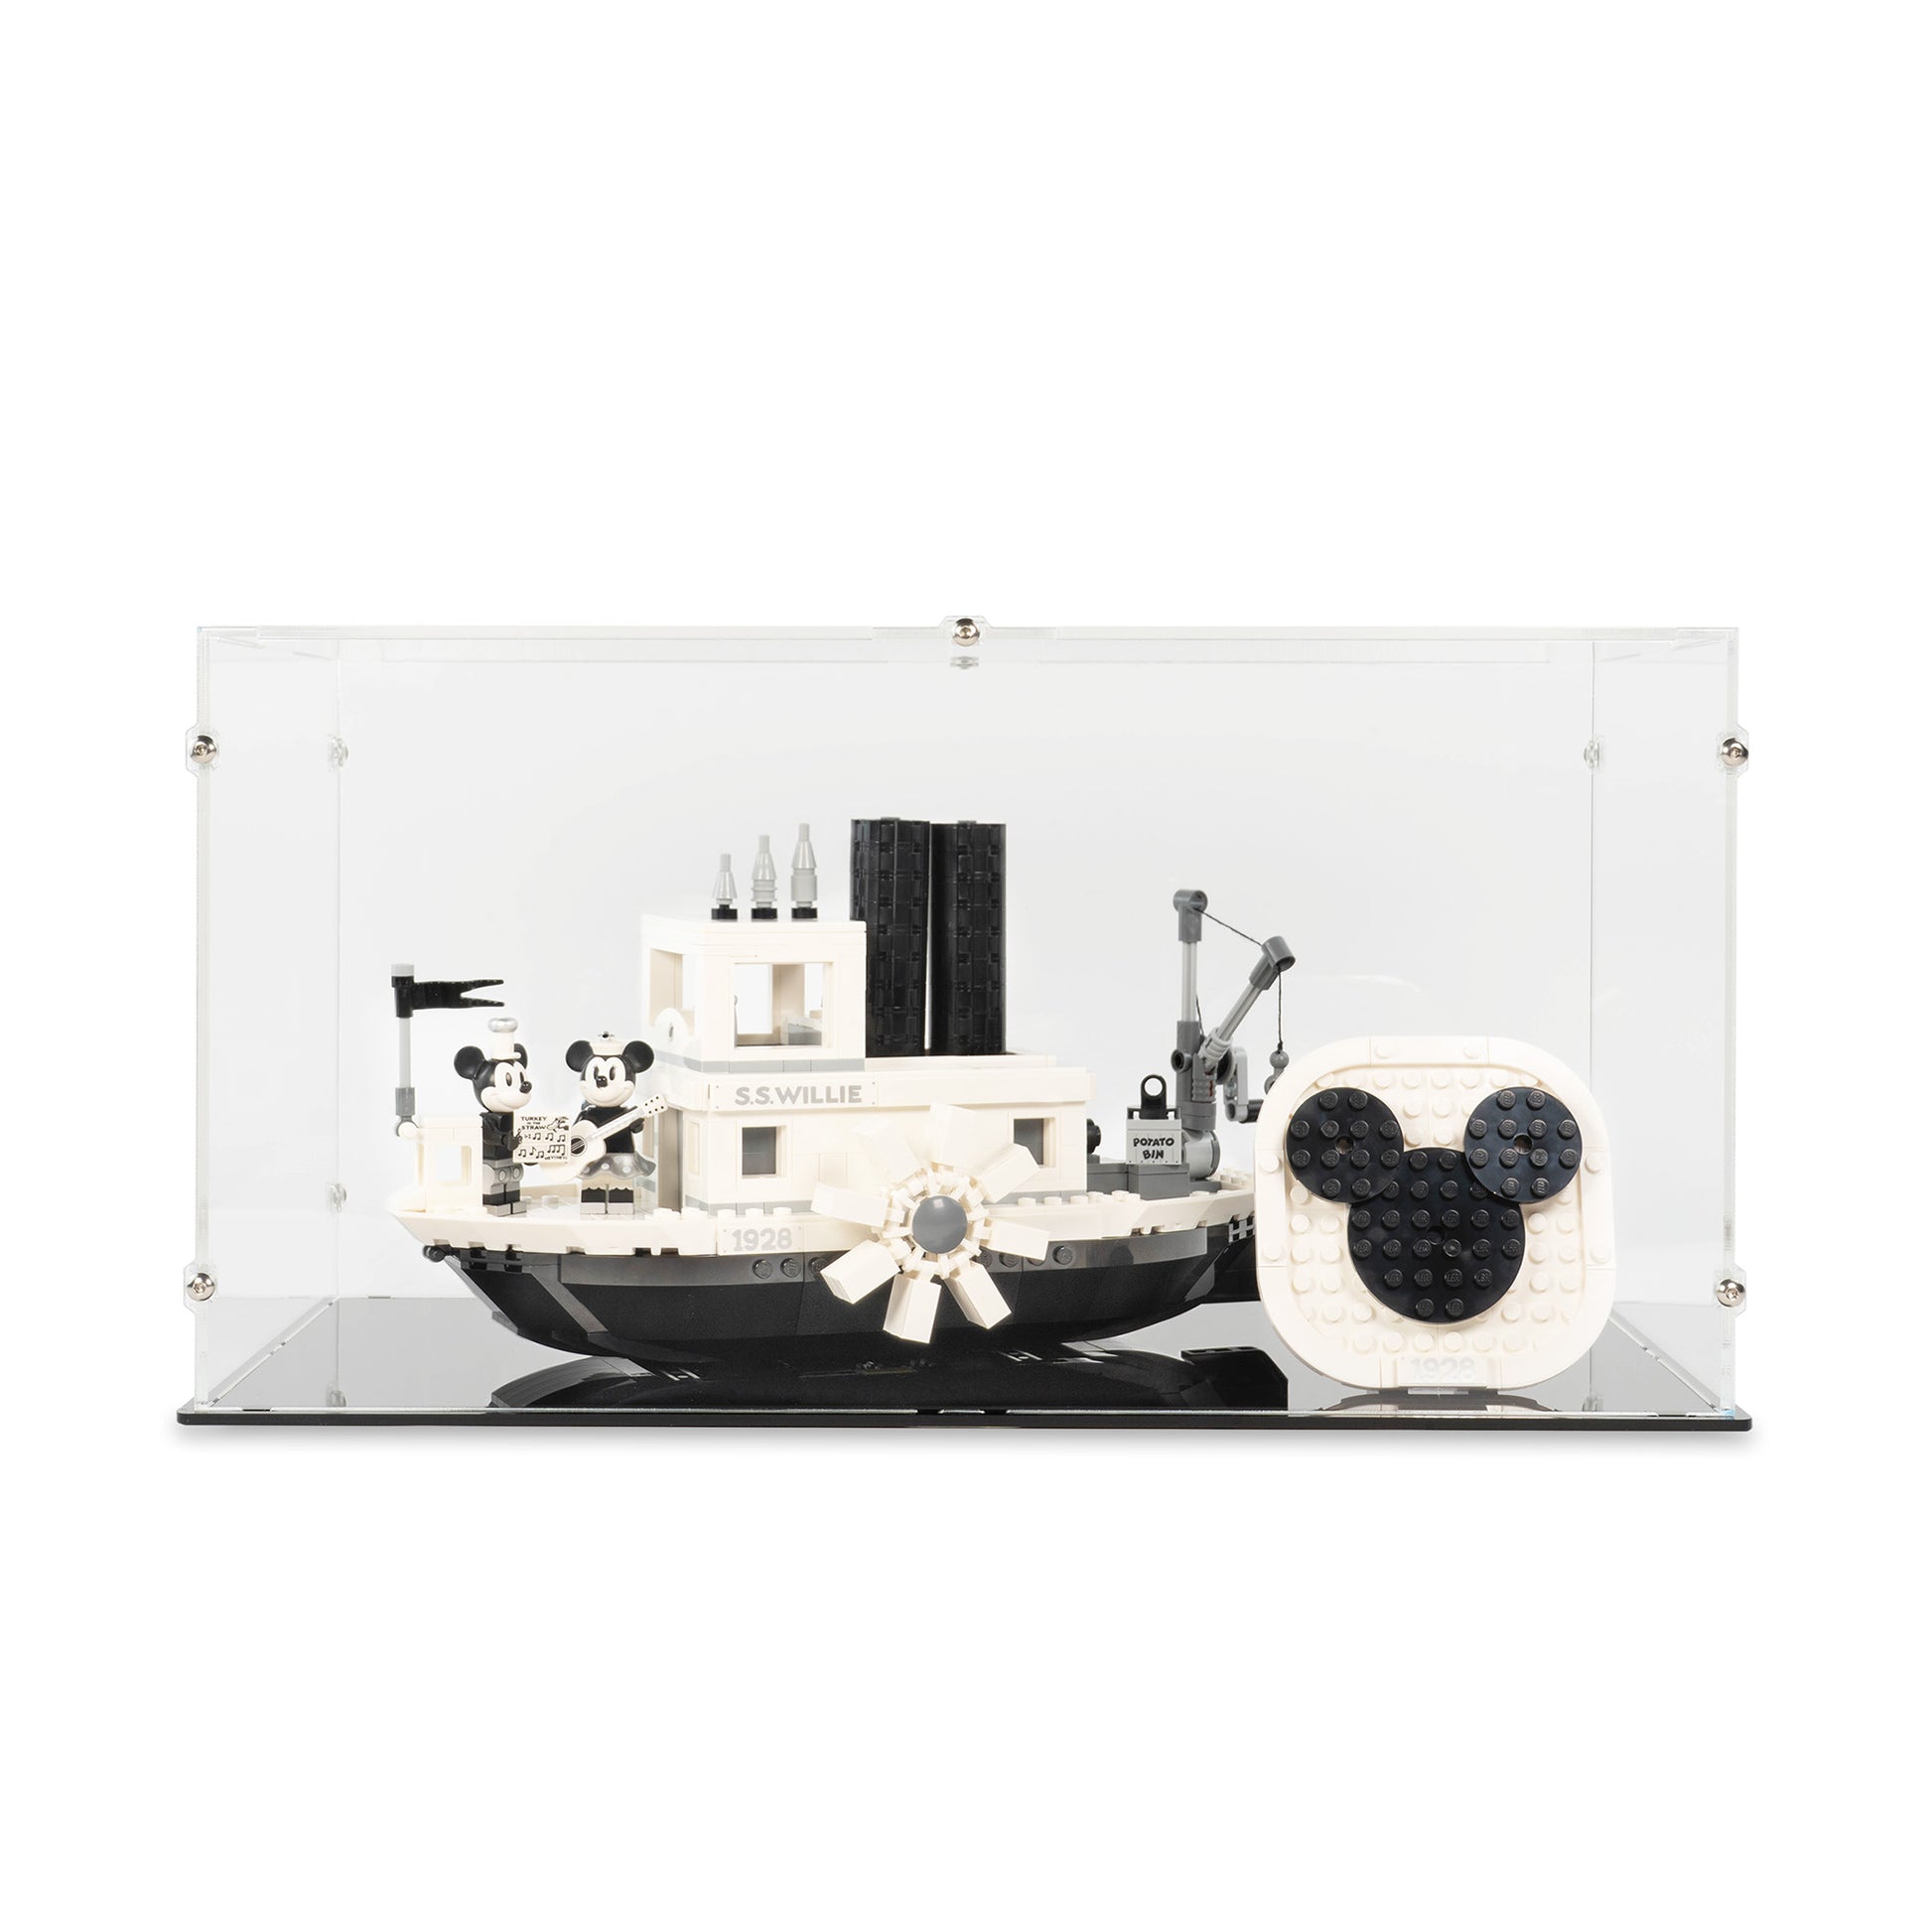 Front view of LEGO 21317 Steamboat Willie Display Case.